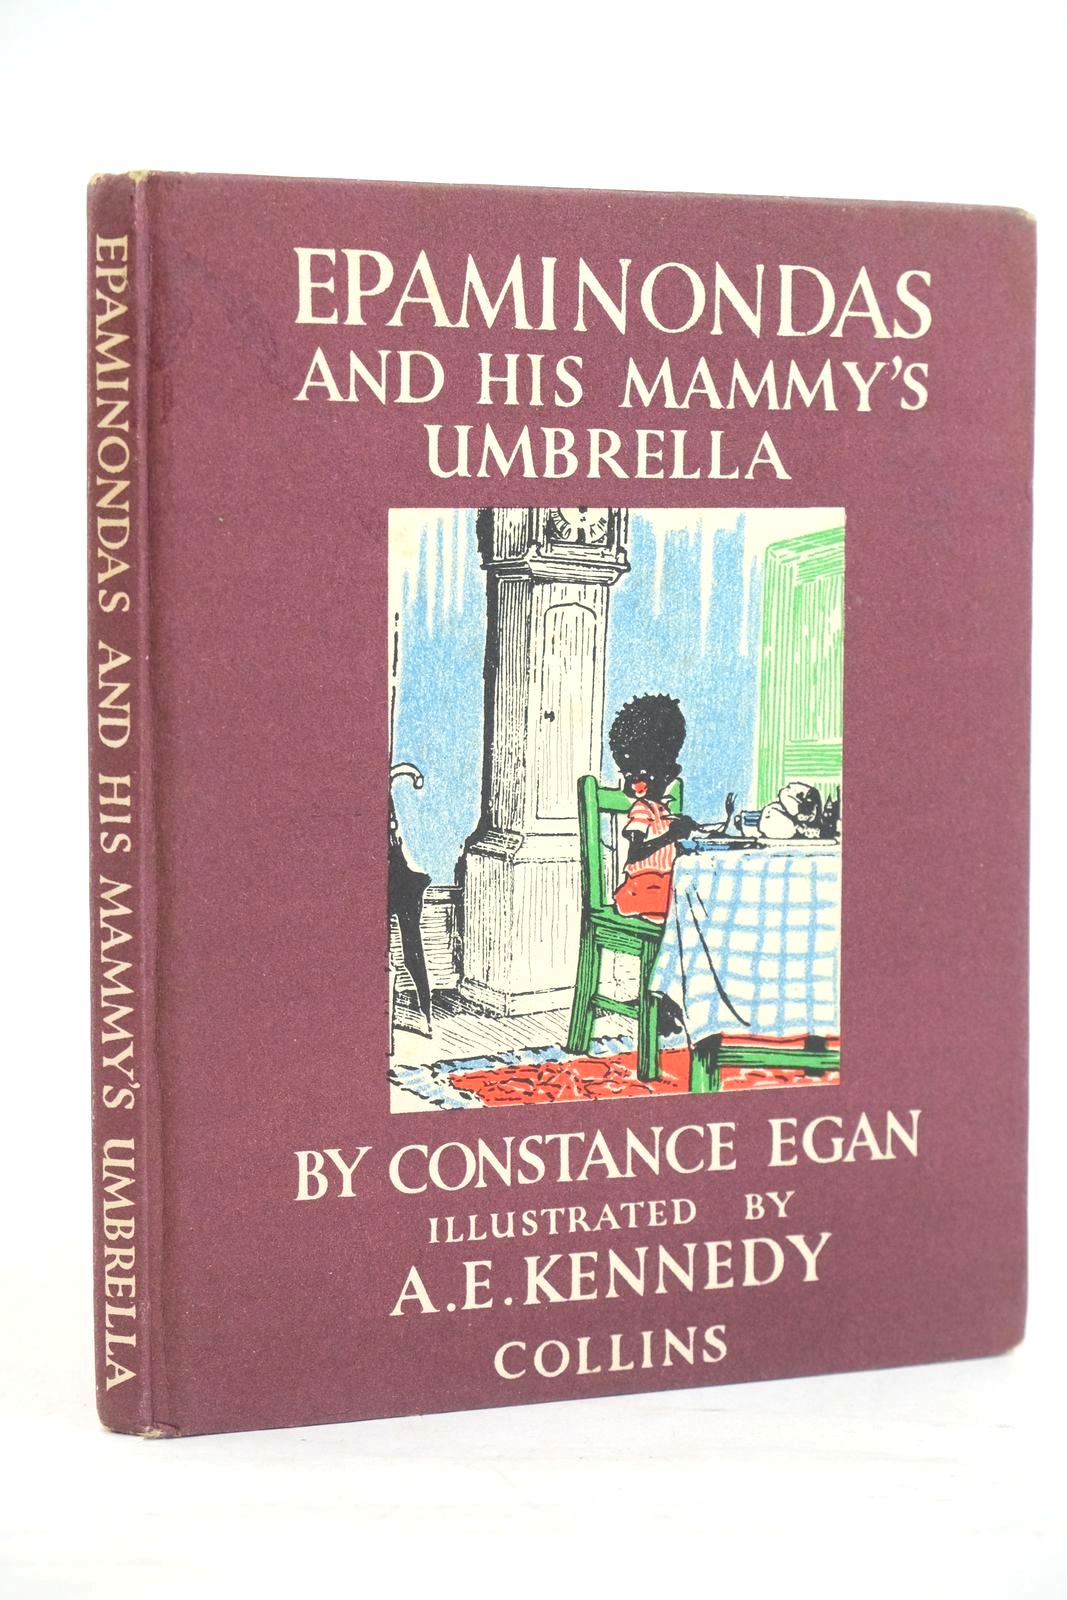 Photo of EPAMINONDAS AND HIS MAMMY'S UMBRELLA written by Egan, Constance illustrated by Kennedy, A.E. published by Collins (STOCK CODE: 1320095)  for sale by Stella & Rose's Books